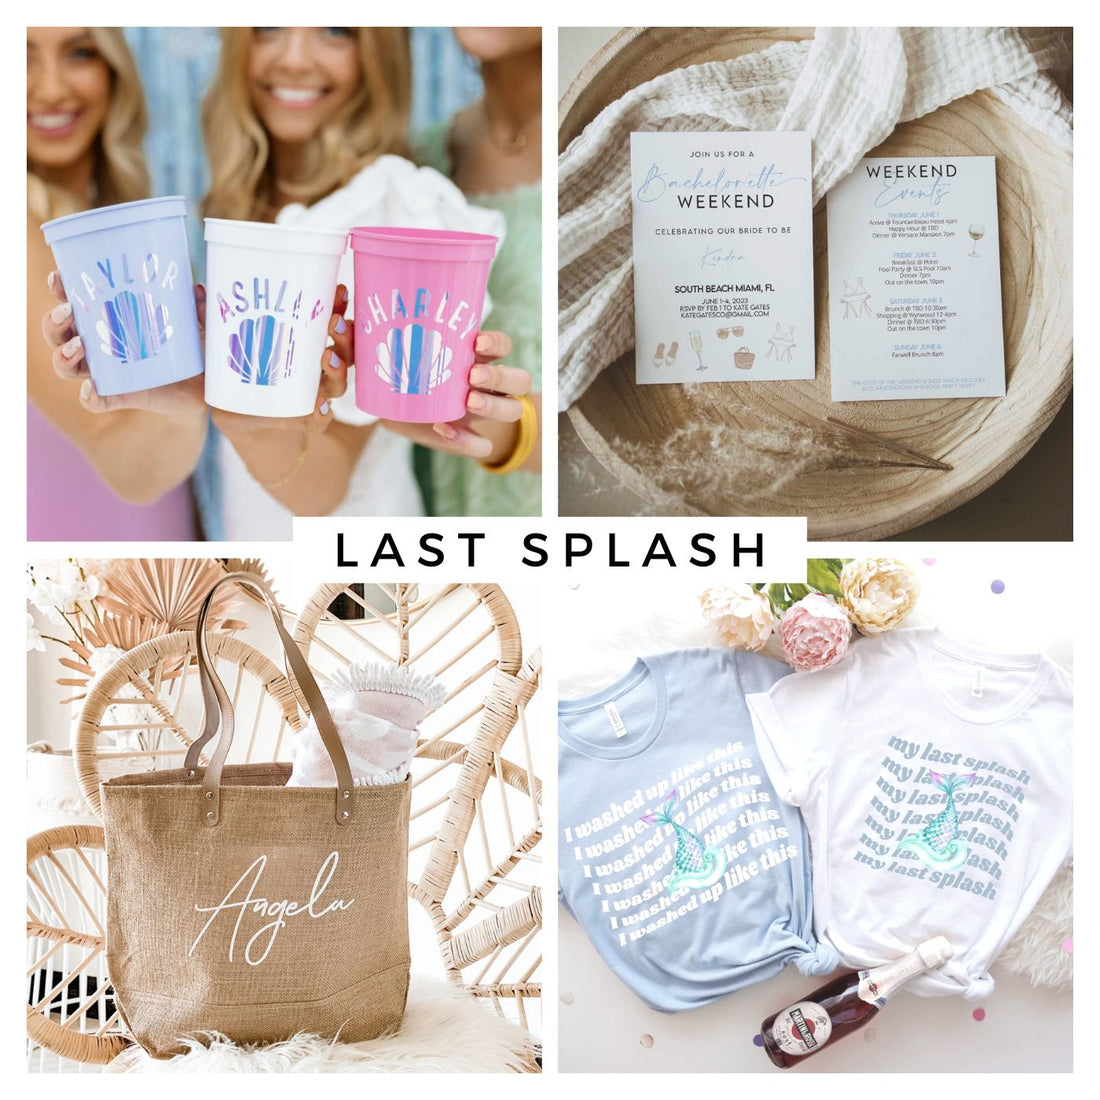 Last Splash Bachelorette Party Decorations, Gifts, and Accessories